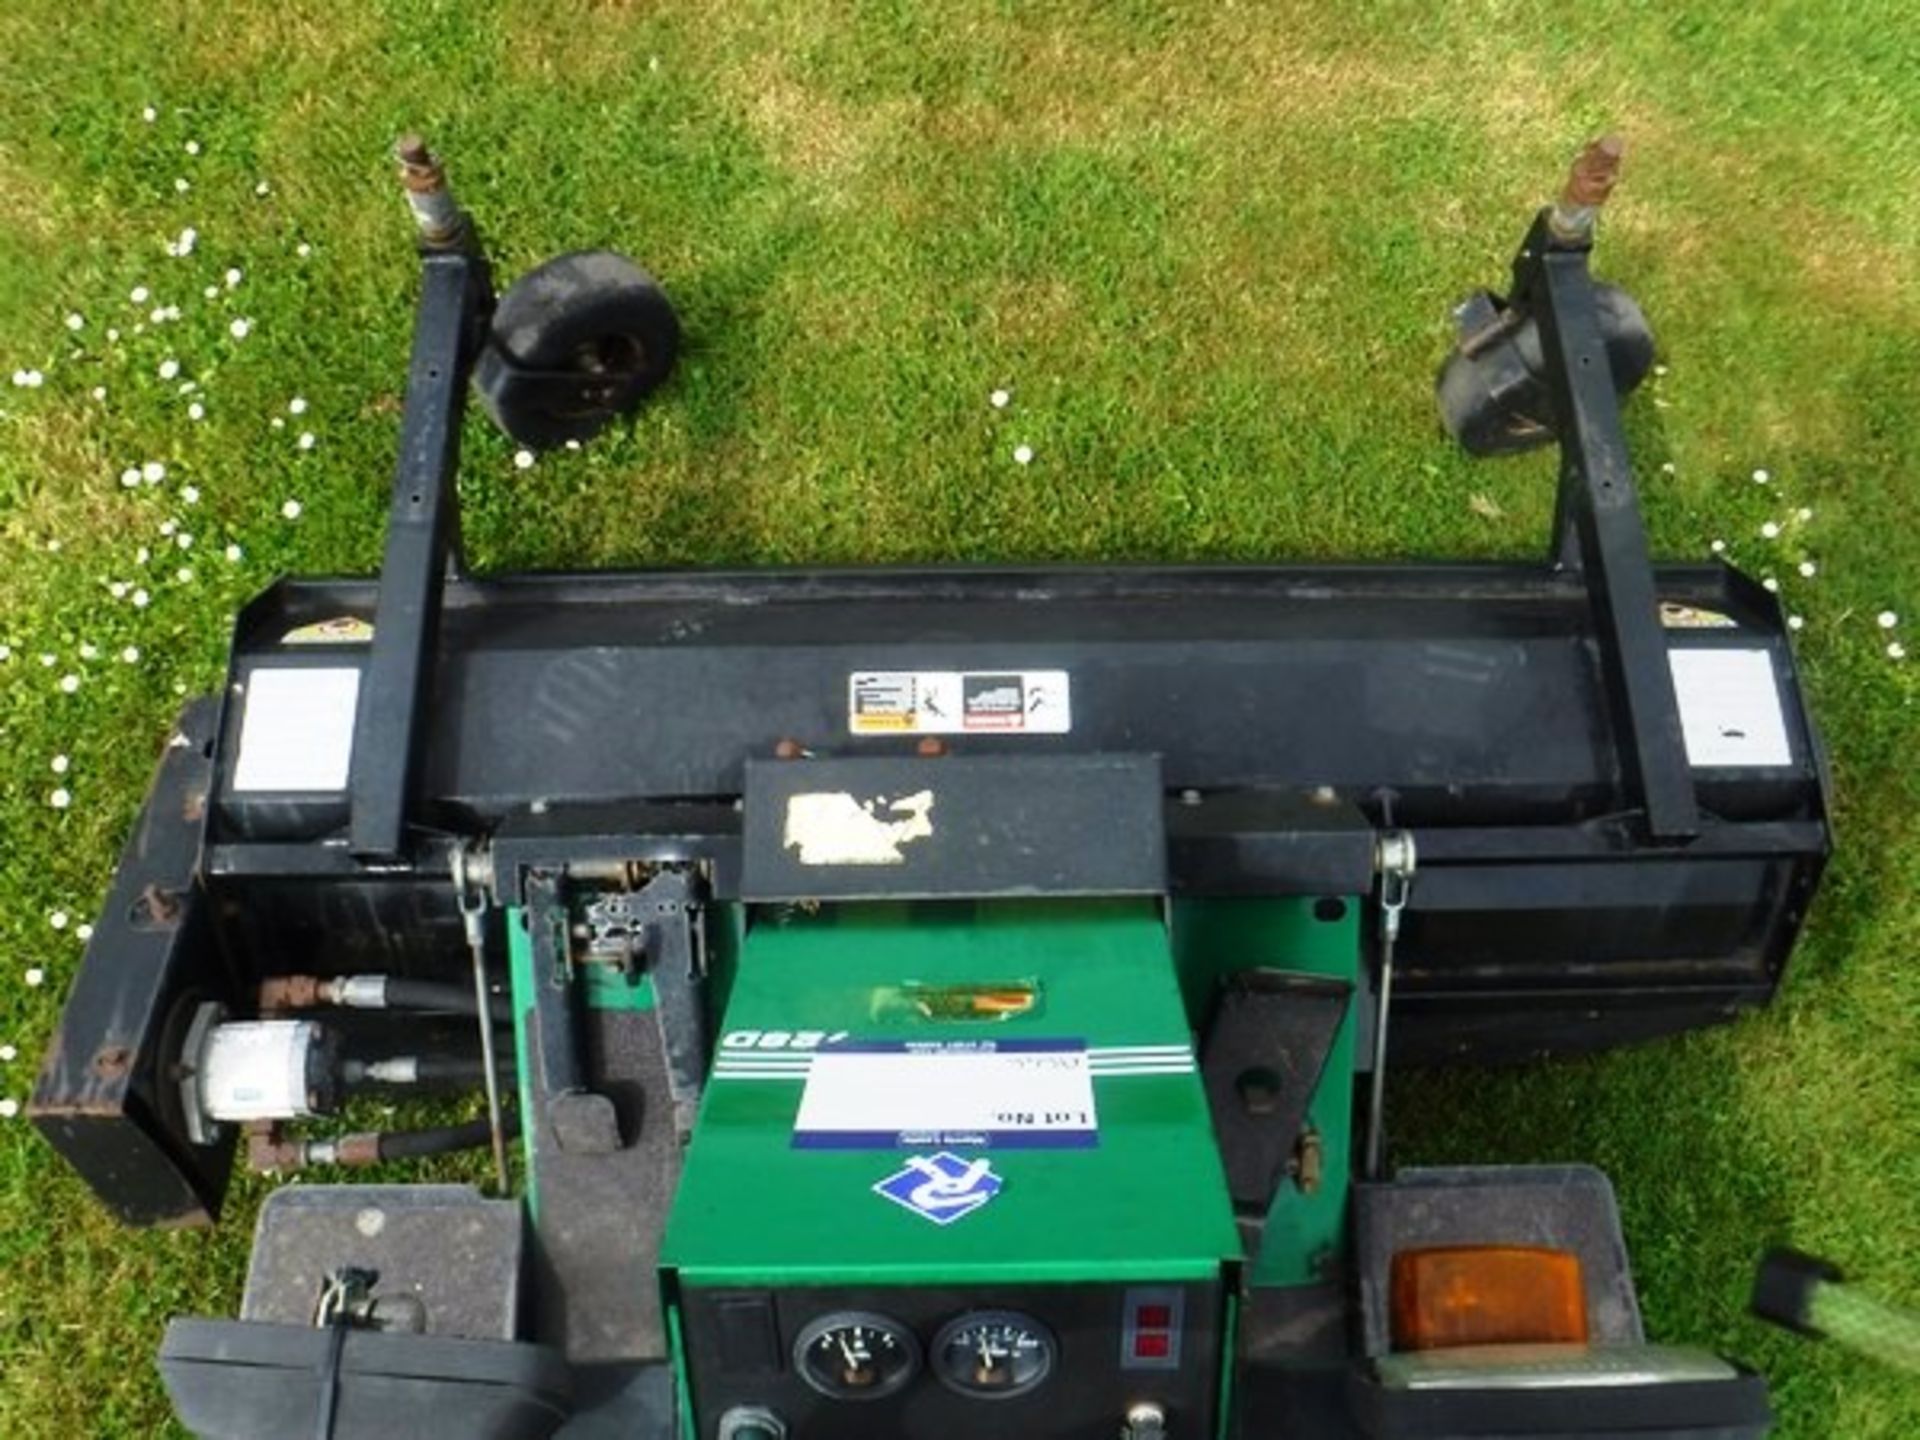 RANSOMES FRONT LINE 7280 ride on mower. Reg - Y106BSX. 4029hrs (not verified) - Image 2 of 13